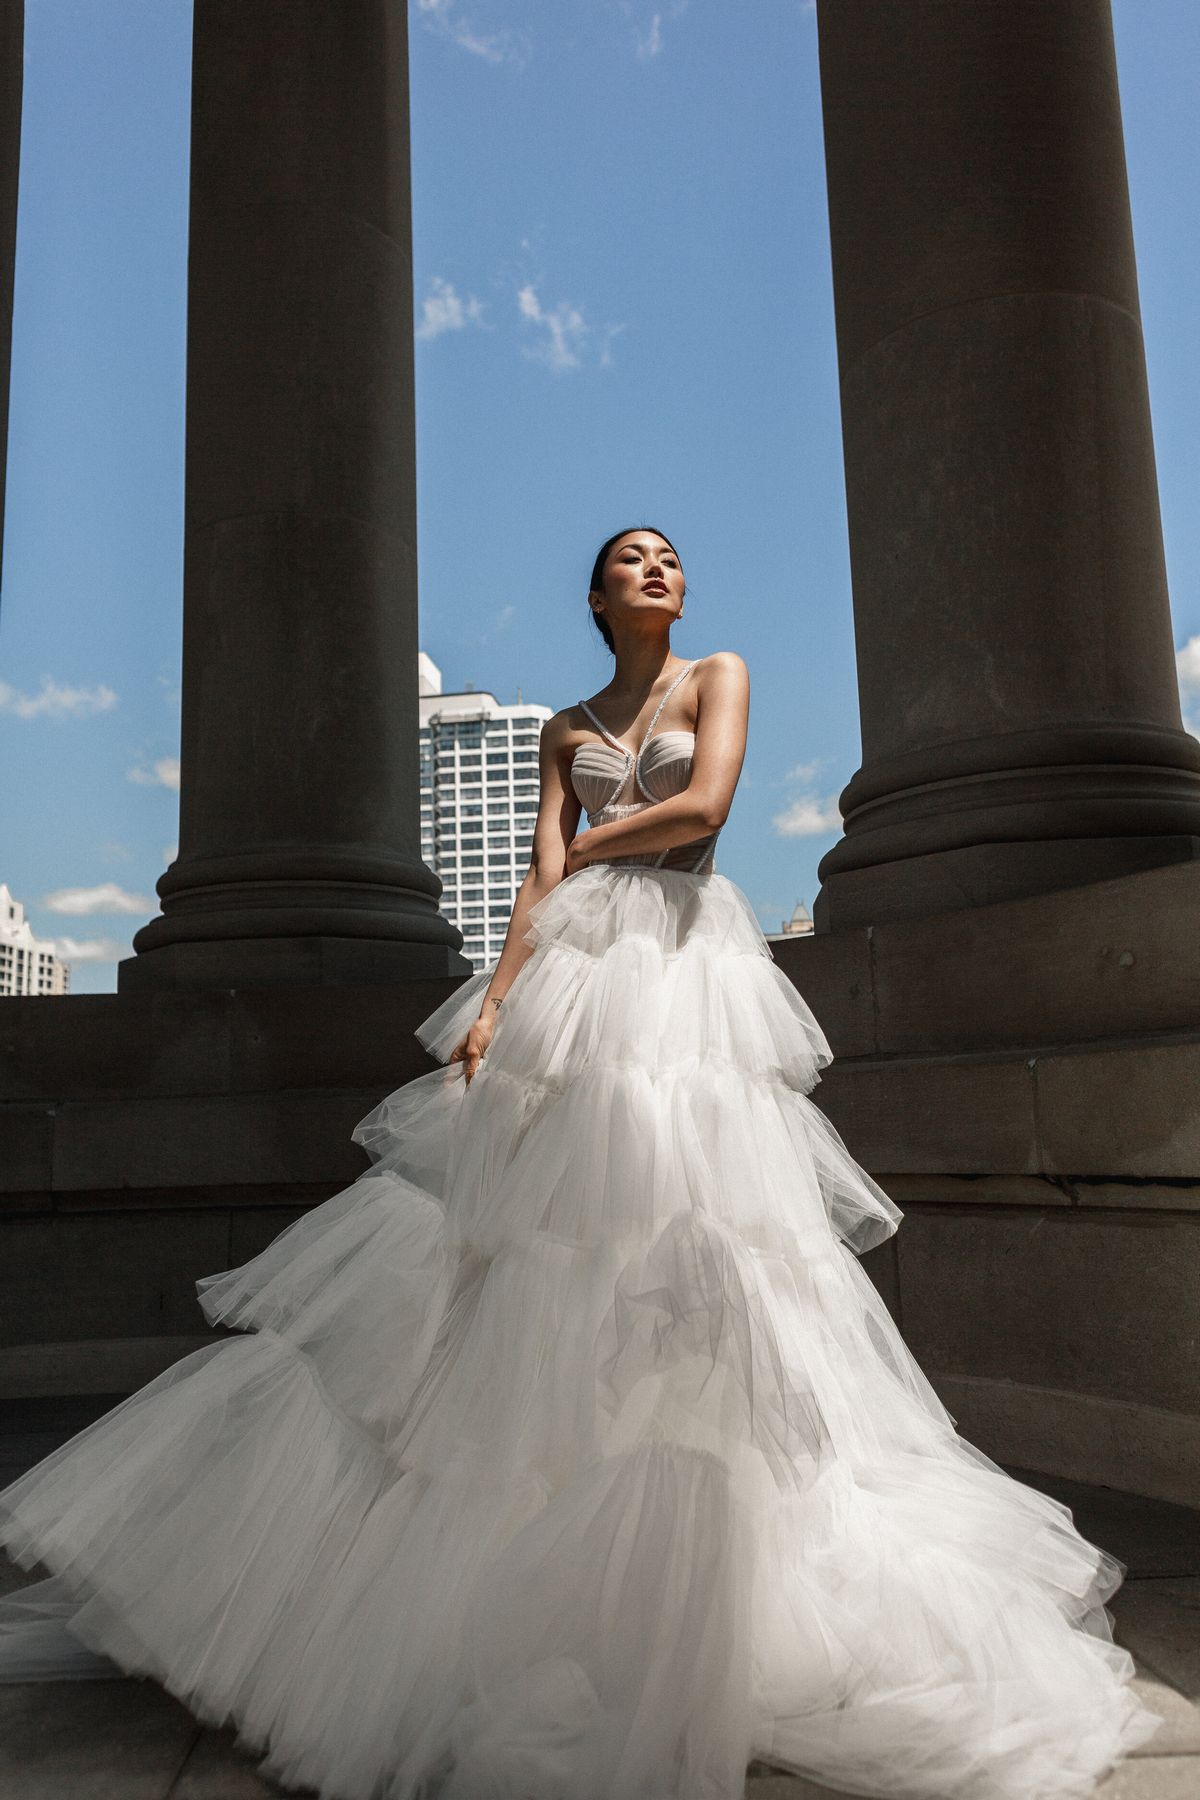 Princess wedding dress Liam by Blammo-Biamo with fluffy multi-layered skirt and bodice embroidered with straps at Dell'Amore Bridal, Auckland, NZ 9